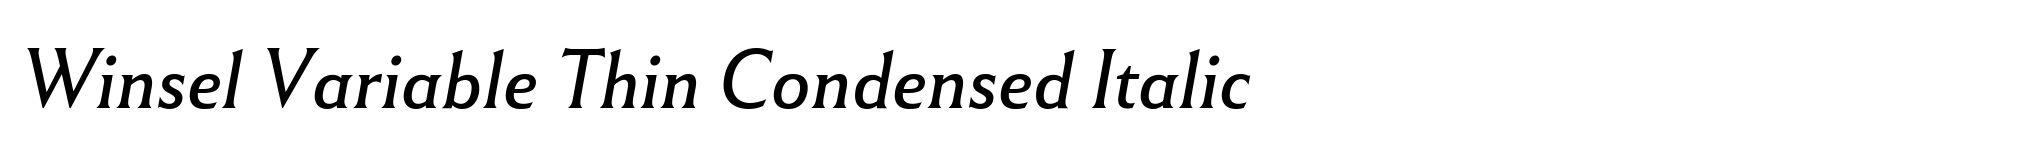 Winsel Variable Thin Condensed Italic image